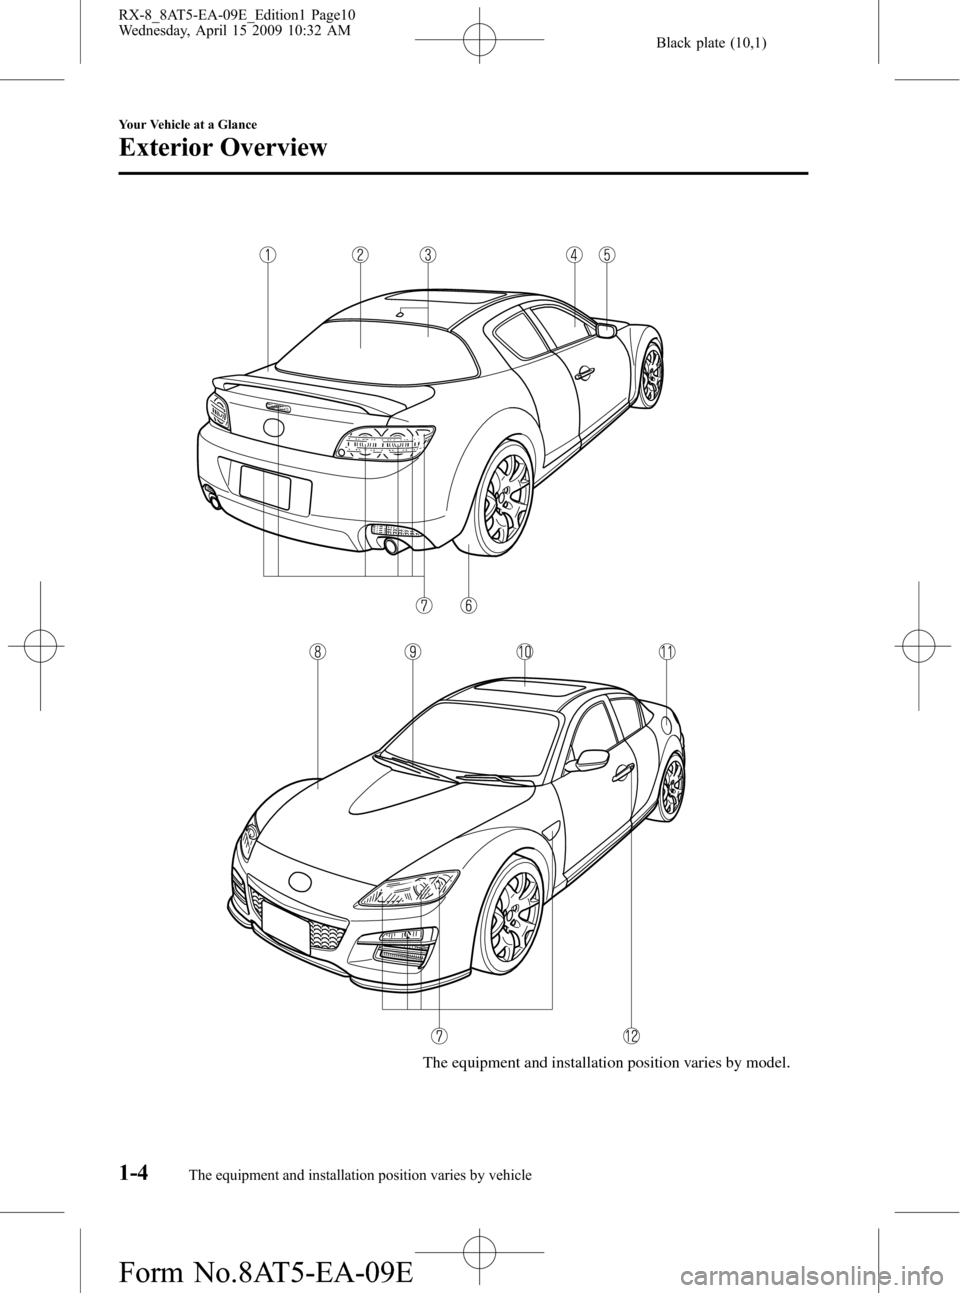 MAZDA MODEL RX 8 2010  Owners Manual (in English) Black plate (10,1)
The equipment and installation position varies by model.
1-4
Your Vehicle at a Glance
The equipment and installation position varies by vehicle
Exterior Overview
RX-8_8AT5-EA-09E_Ed